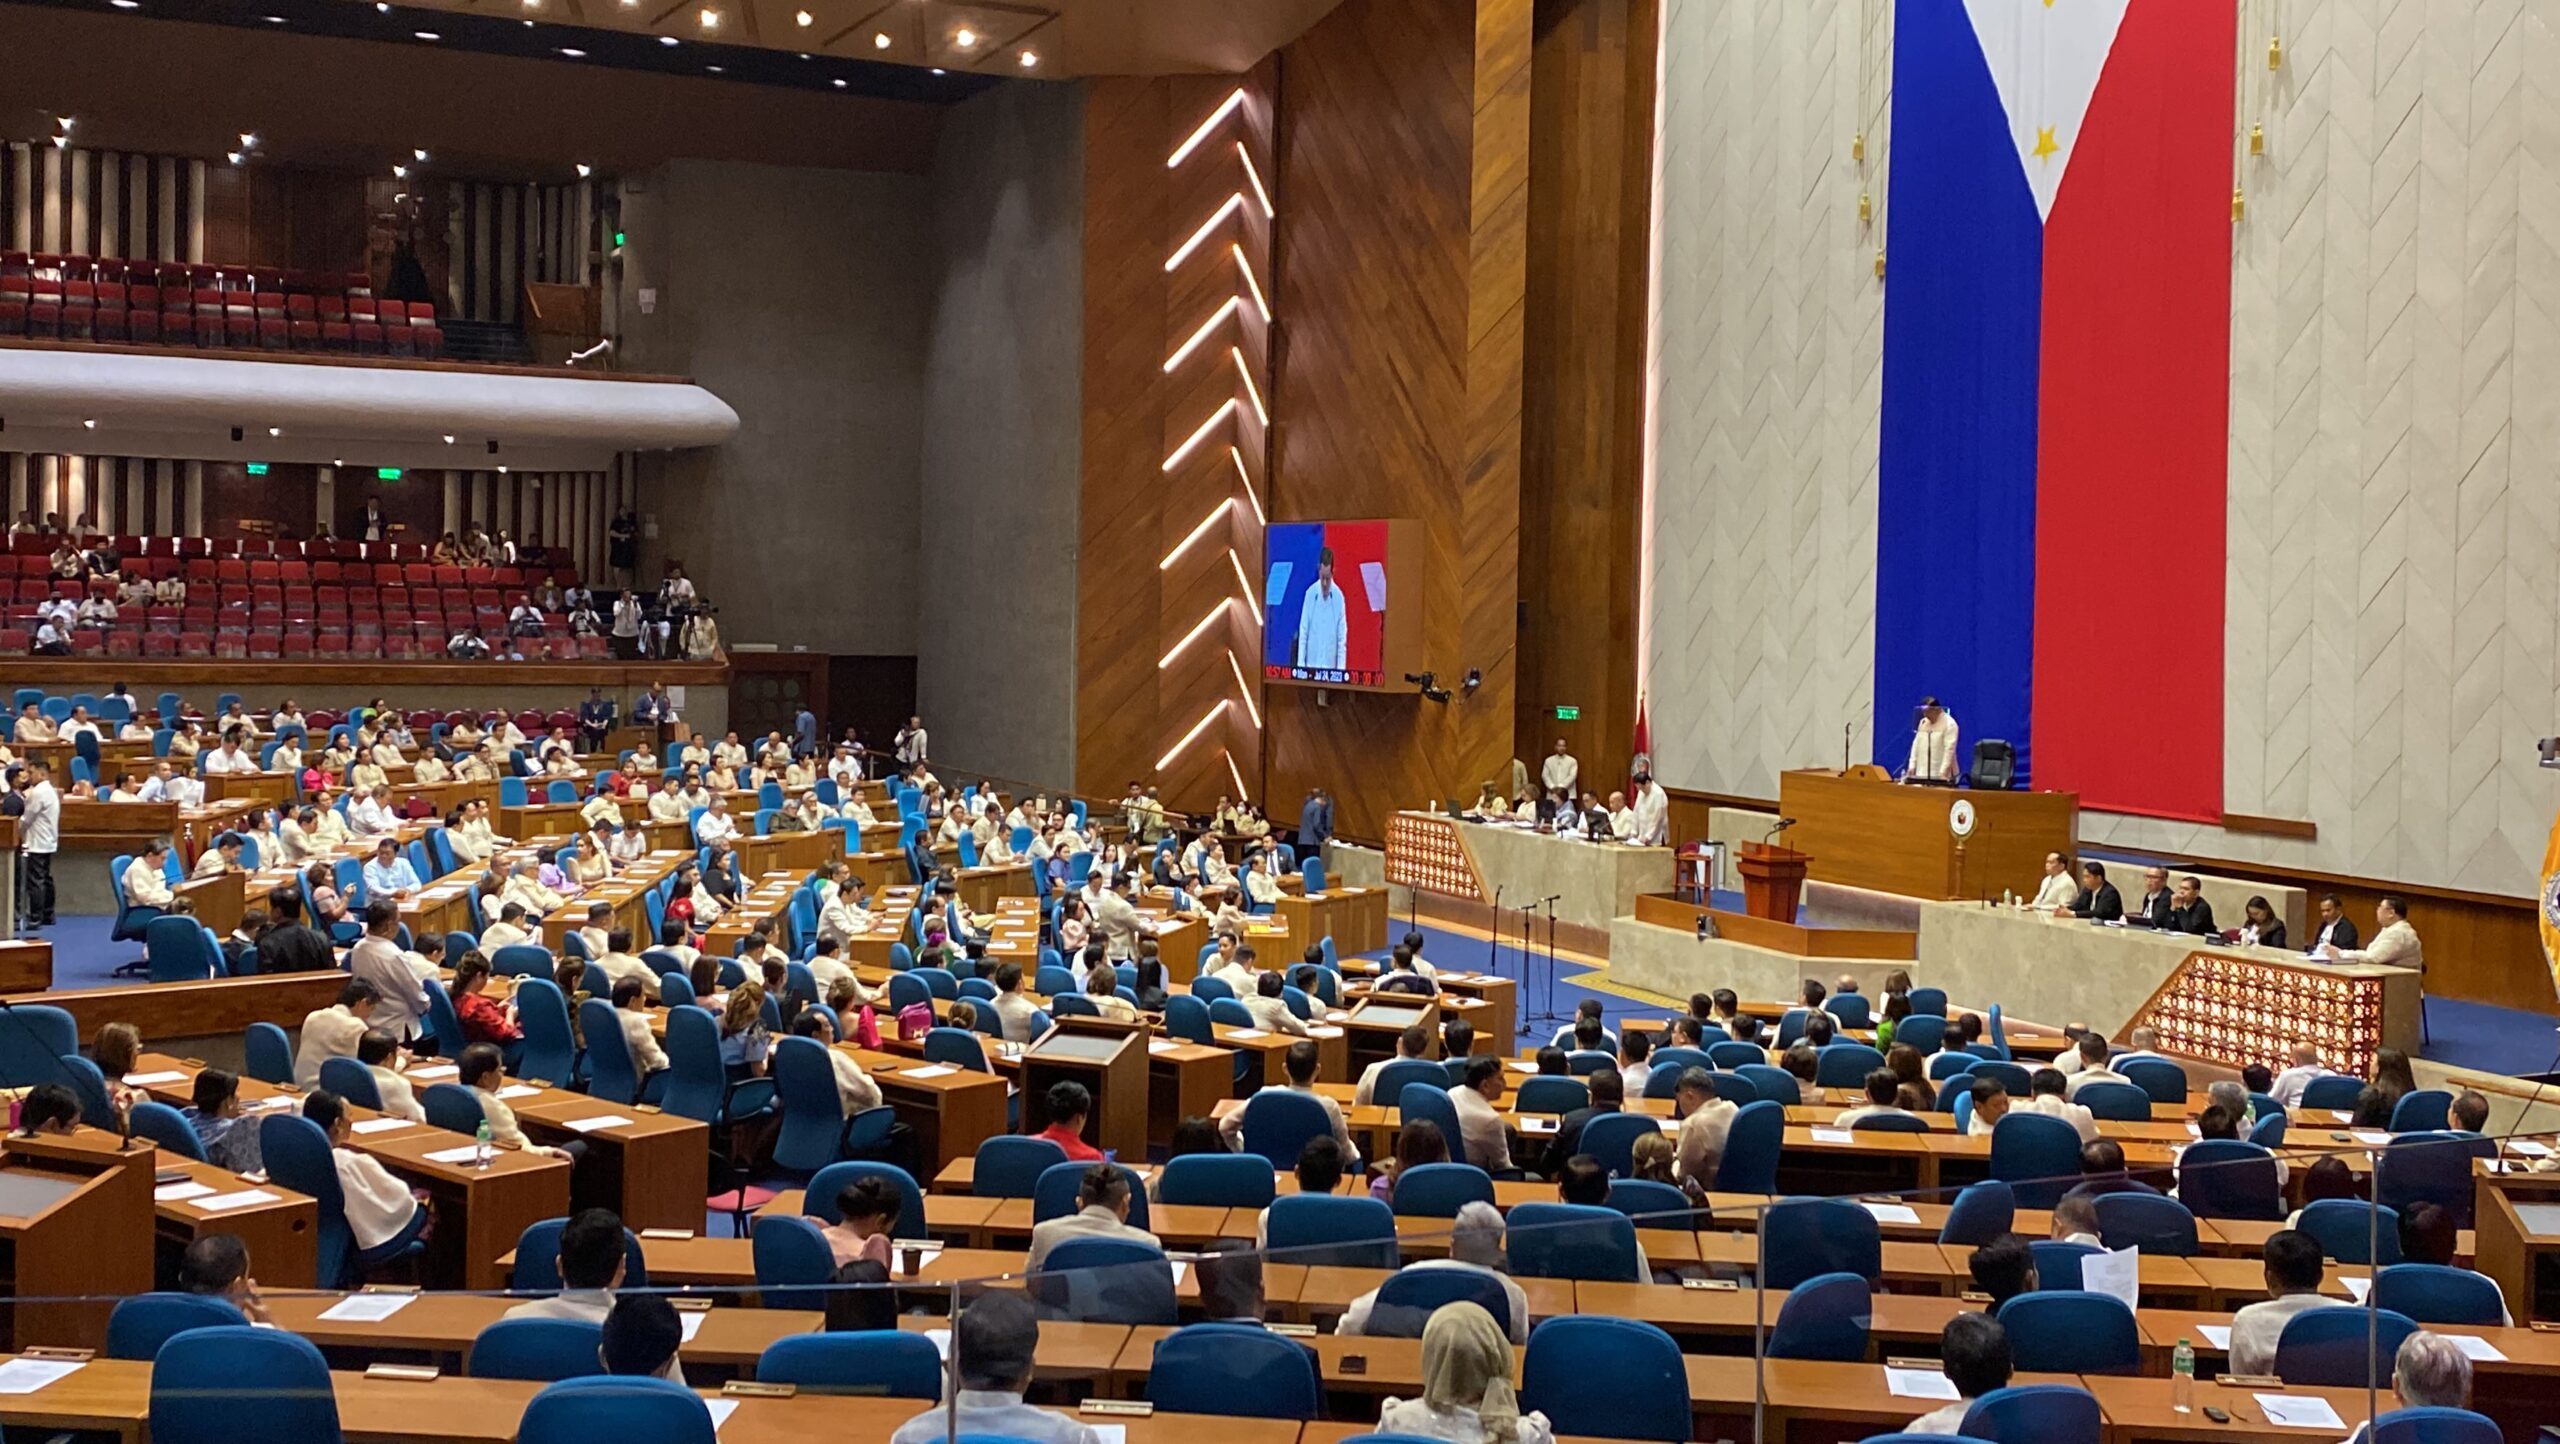 Contrary to Duterte’s claims: No red flags in House audits, says COA